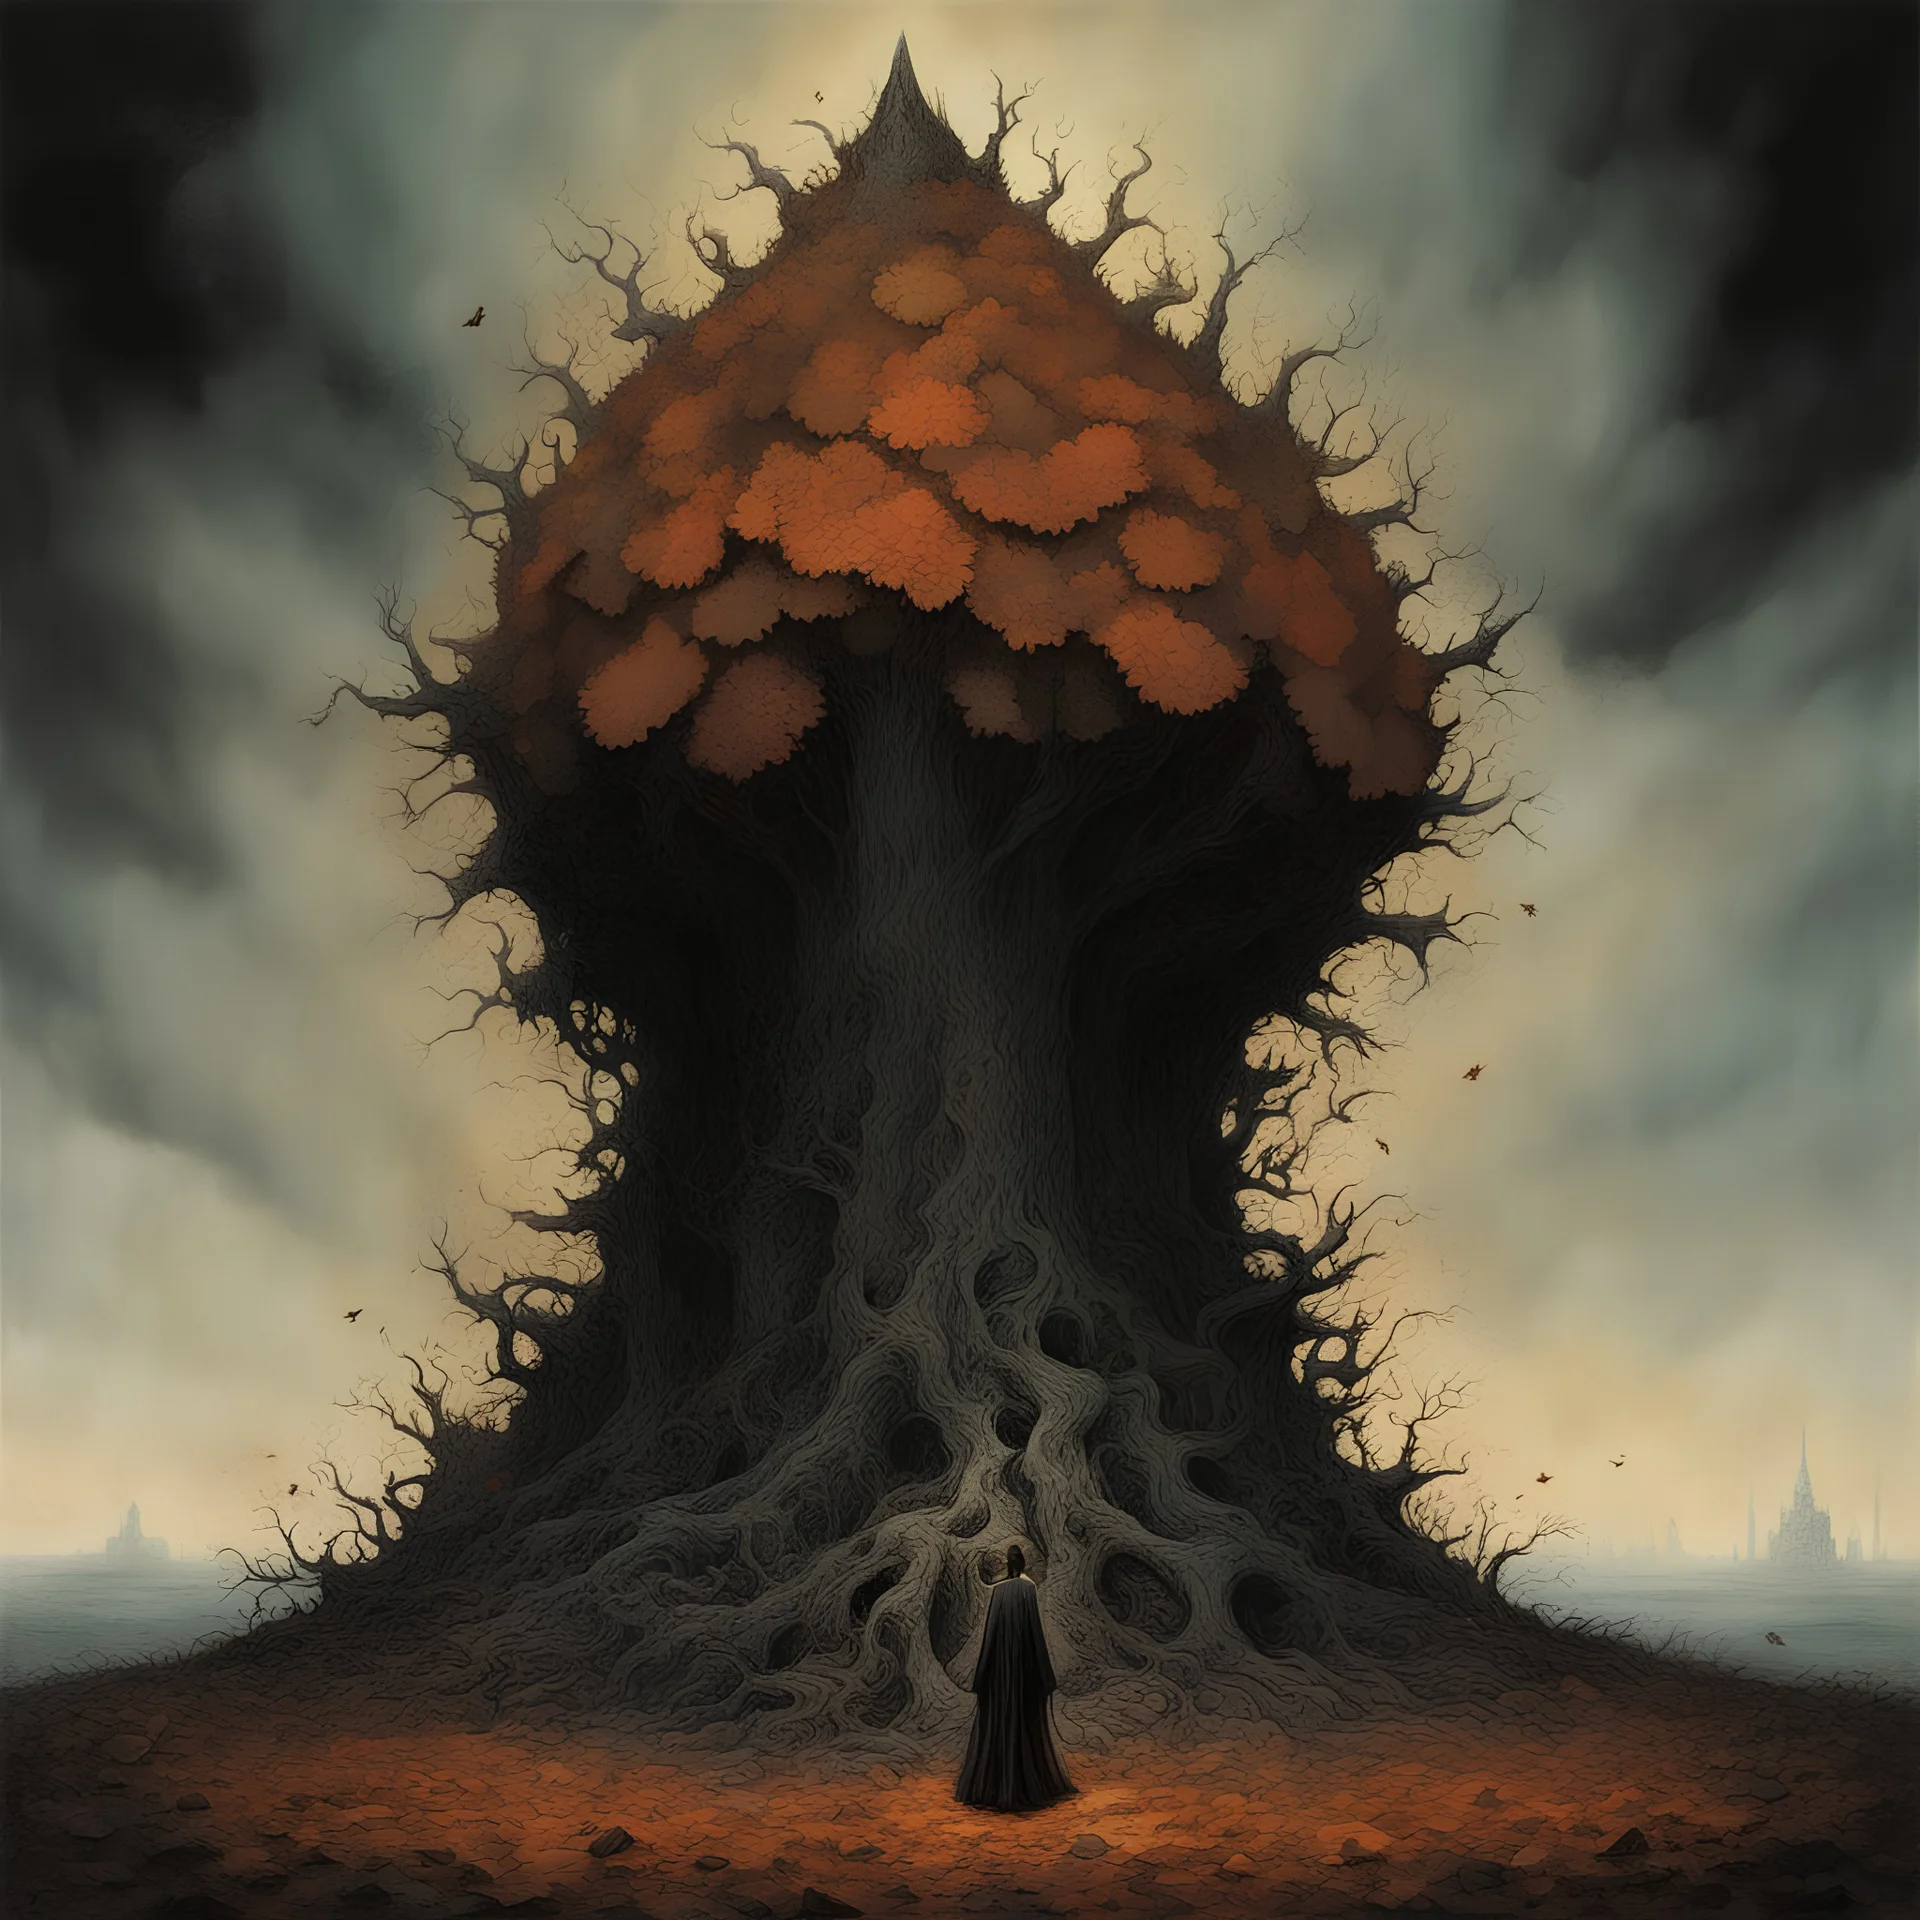 A surreal sentient pile of leaves takes a monstrous form, by Zdzislaw Beksinski, by Dave McKean, by Yves Tanguy, horror art, hyperdetailed modern comic ink illustration, dark autumnal colors and aesthetic.